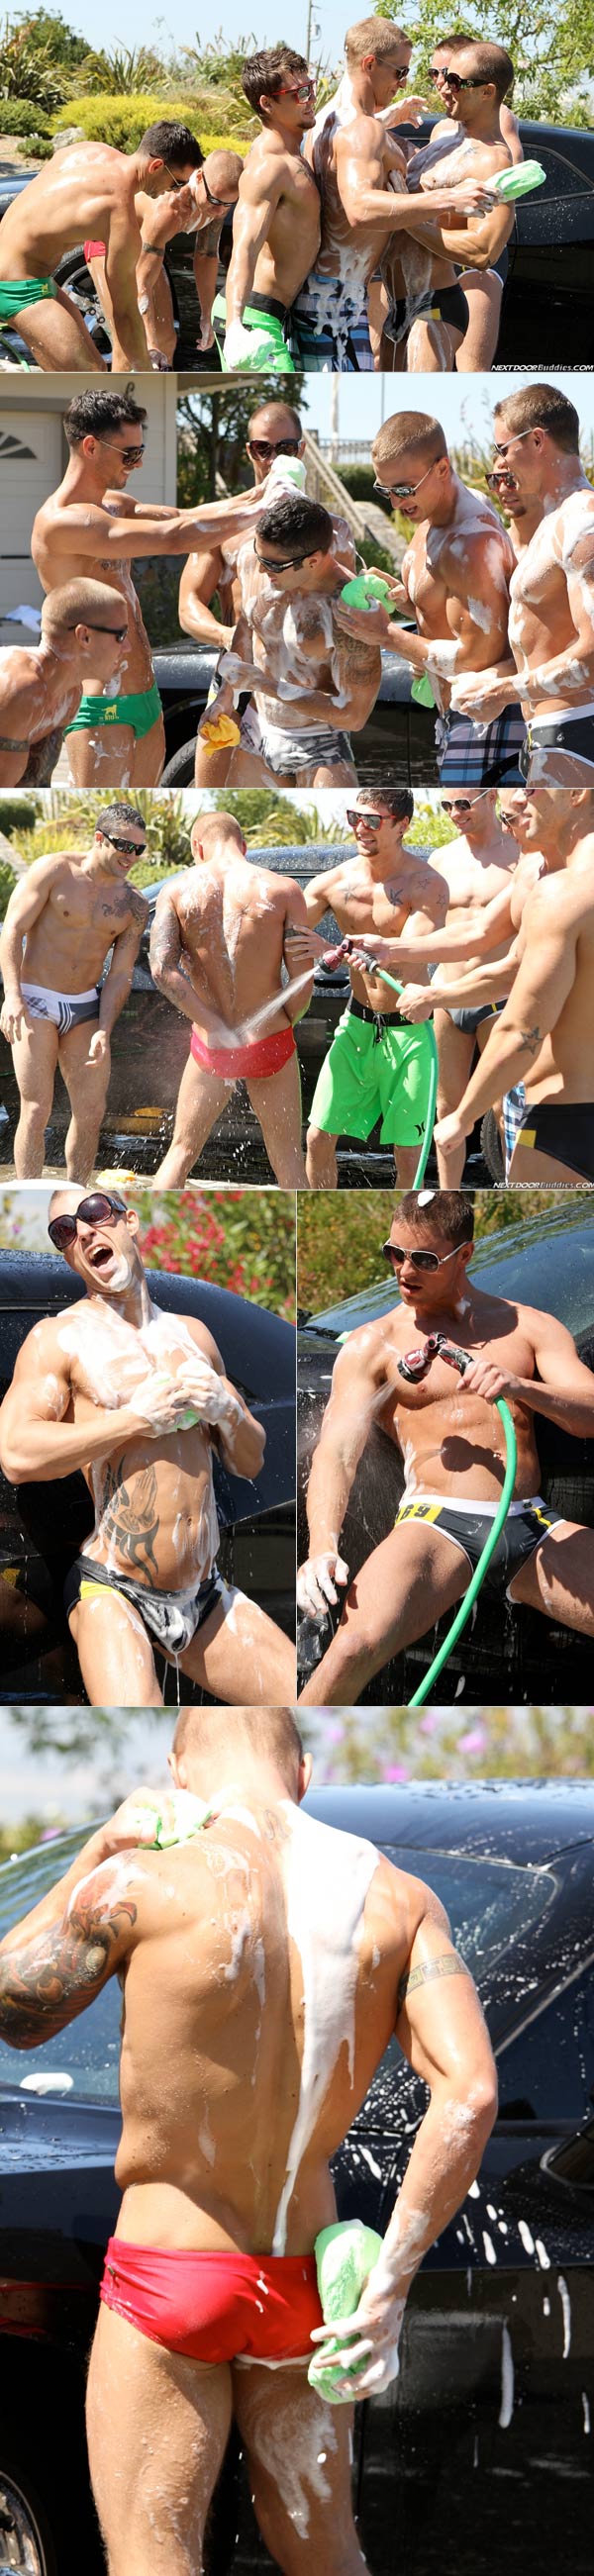 Suds & Studs (Marcus Mojo, Johnny Torque, Rod Daily, Donny Wright, Brody Wilder & Campbell Stevens) at Next Door Buddies